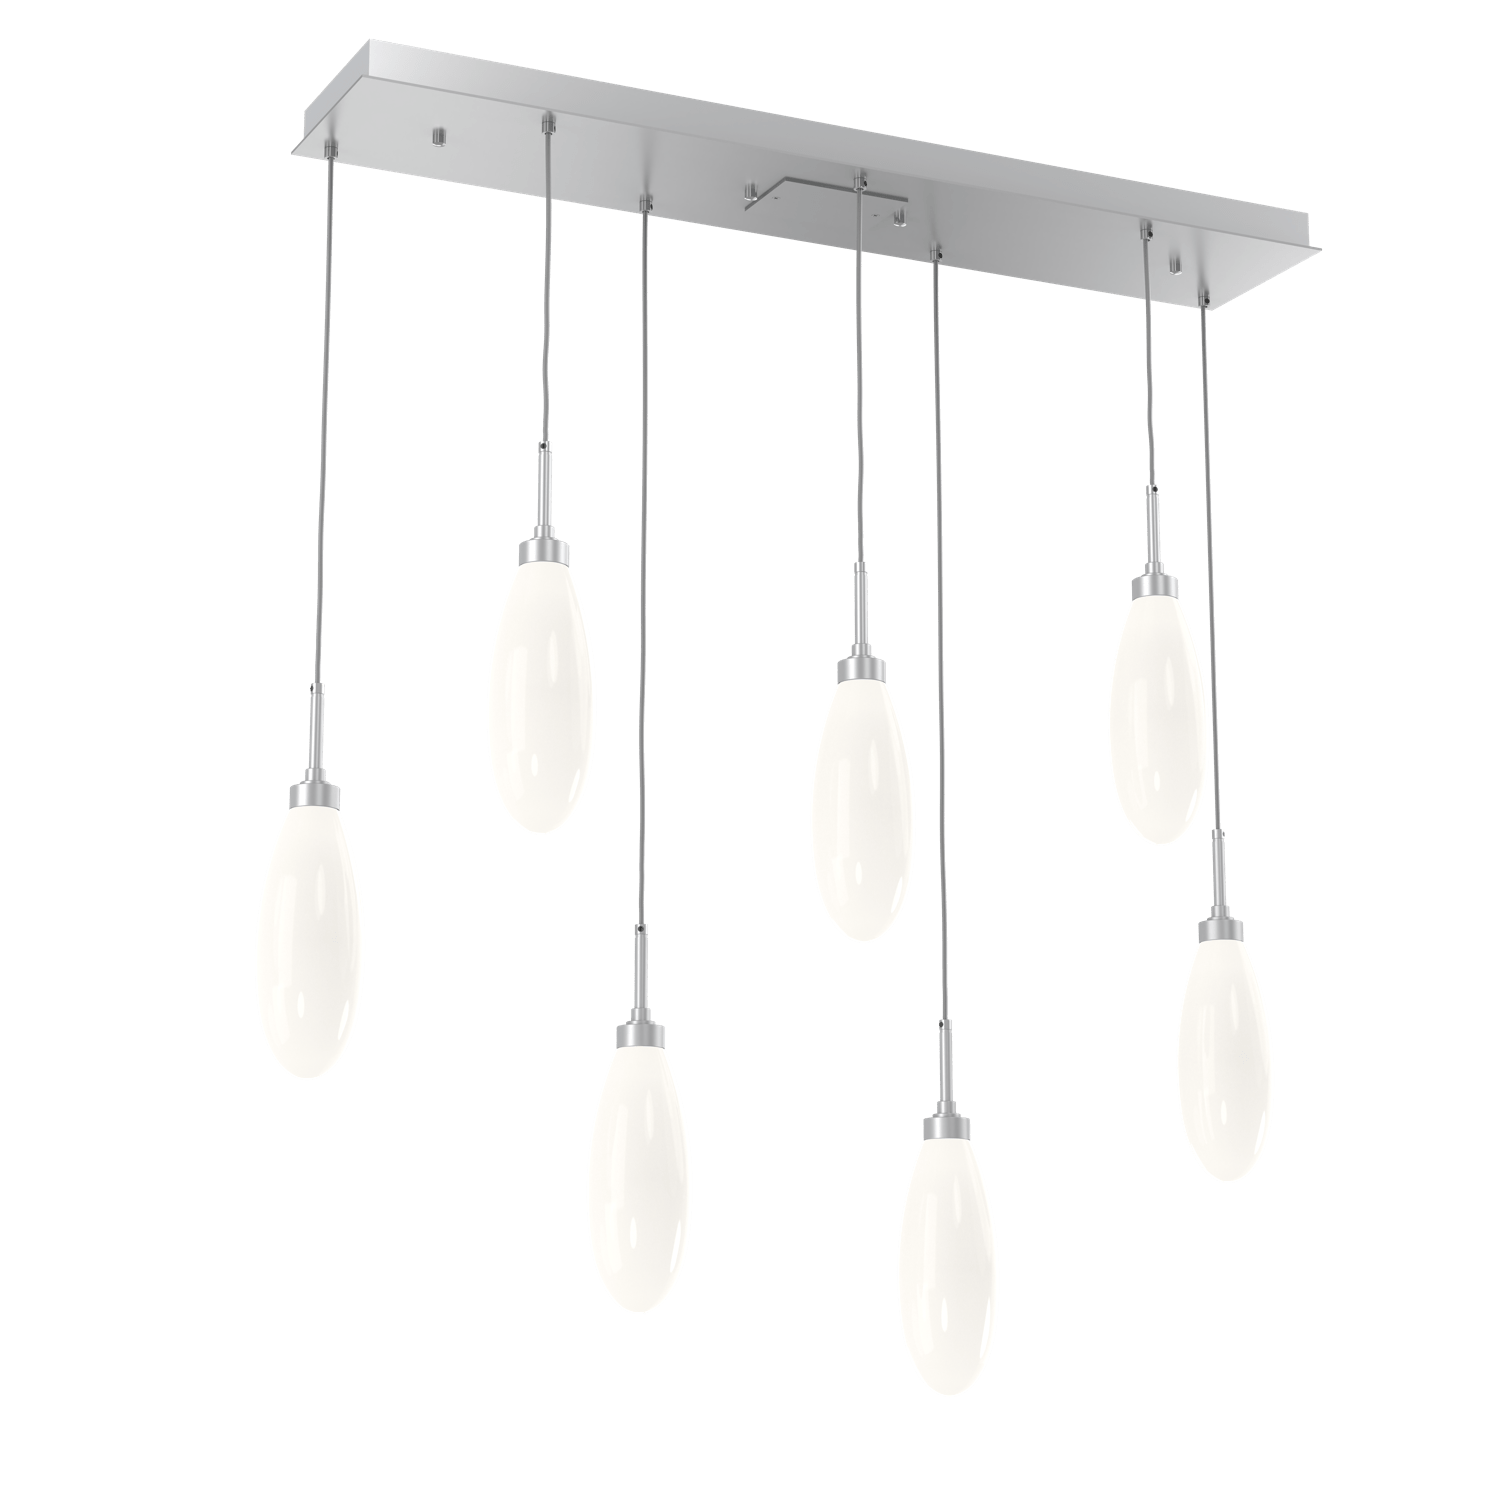 PLB0071-07-CS-WL-LL-Hammerton-Studio-Fiori-7-light-linear-pendant-chandelier-with-classic-silver-finish-and-opal-white-glass-shades-and-LED-lamping